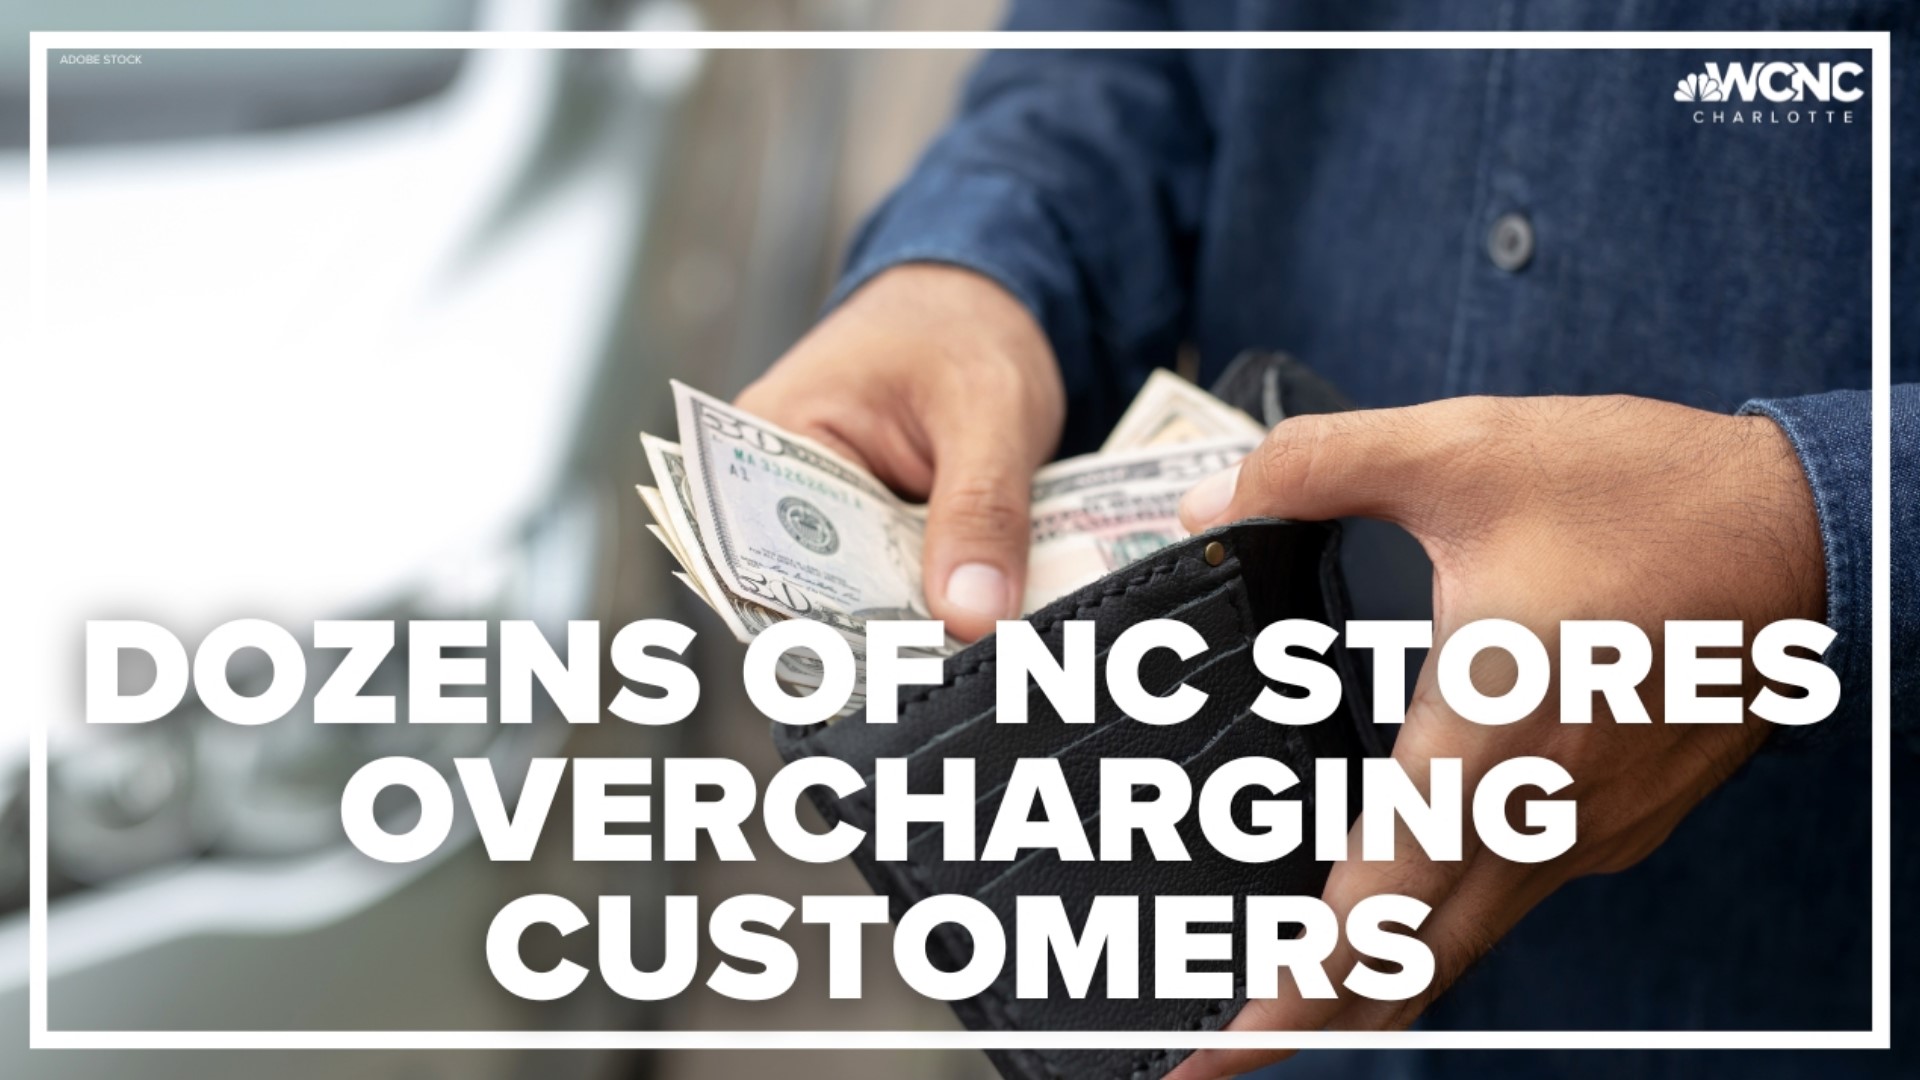 A total of 61 stores in 32 North Carolina counties were fined for price scanning errors that were overcharging customers, state inspectors said.